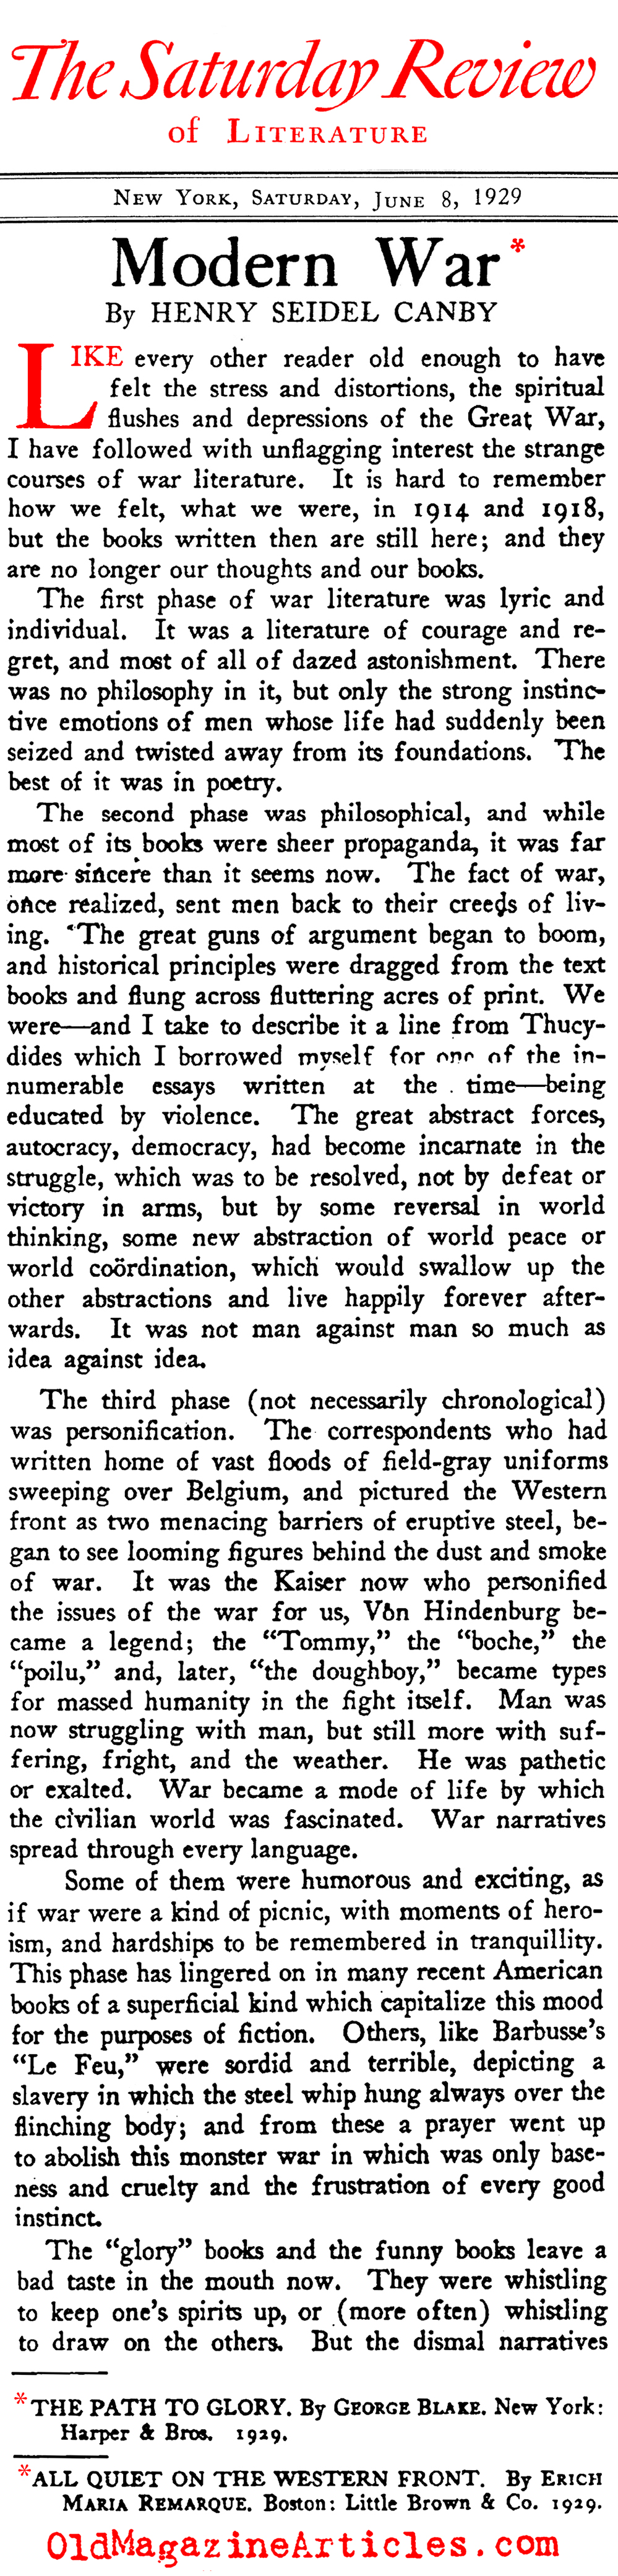 All Quiet on the Western Front (Saturday Review of Literature, 1929)